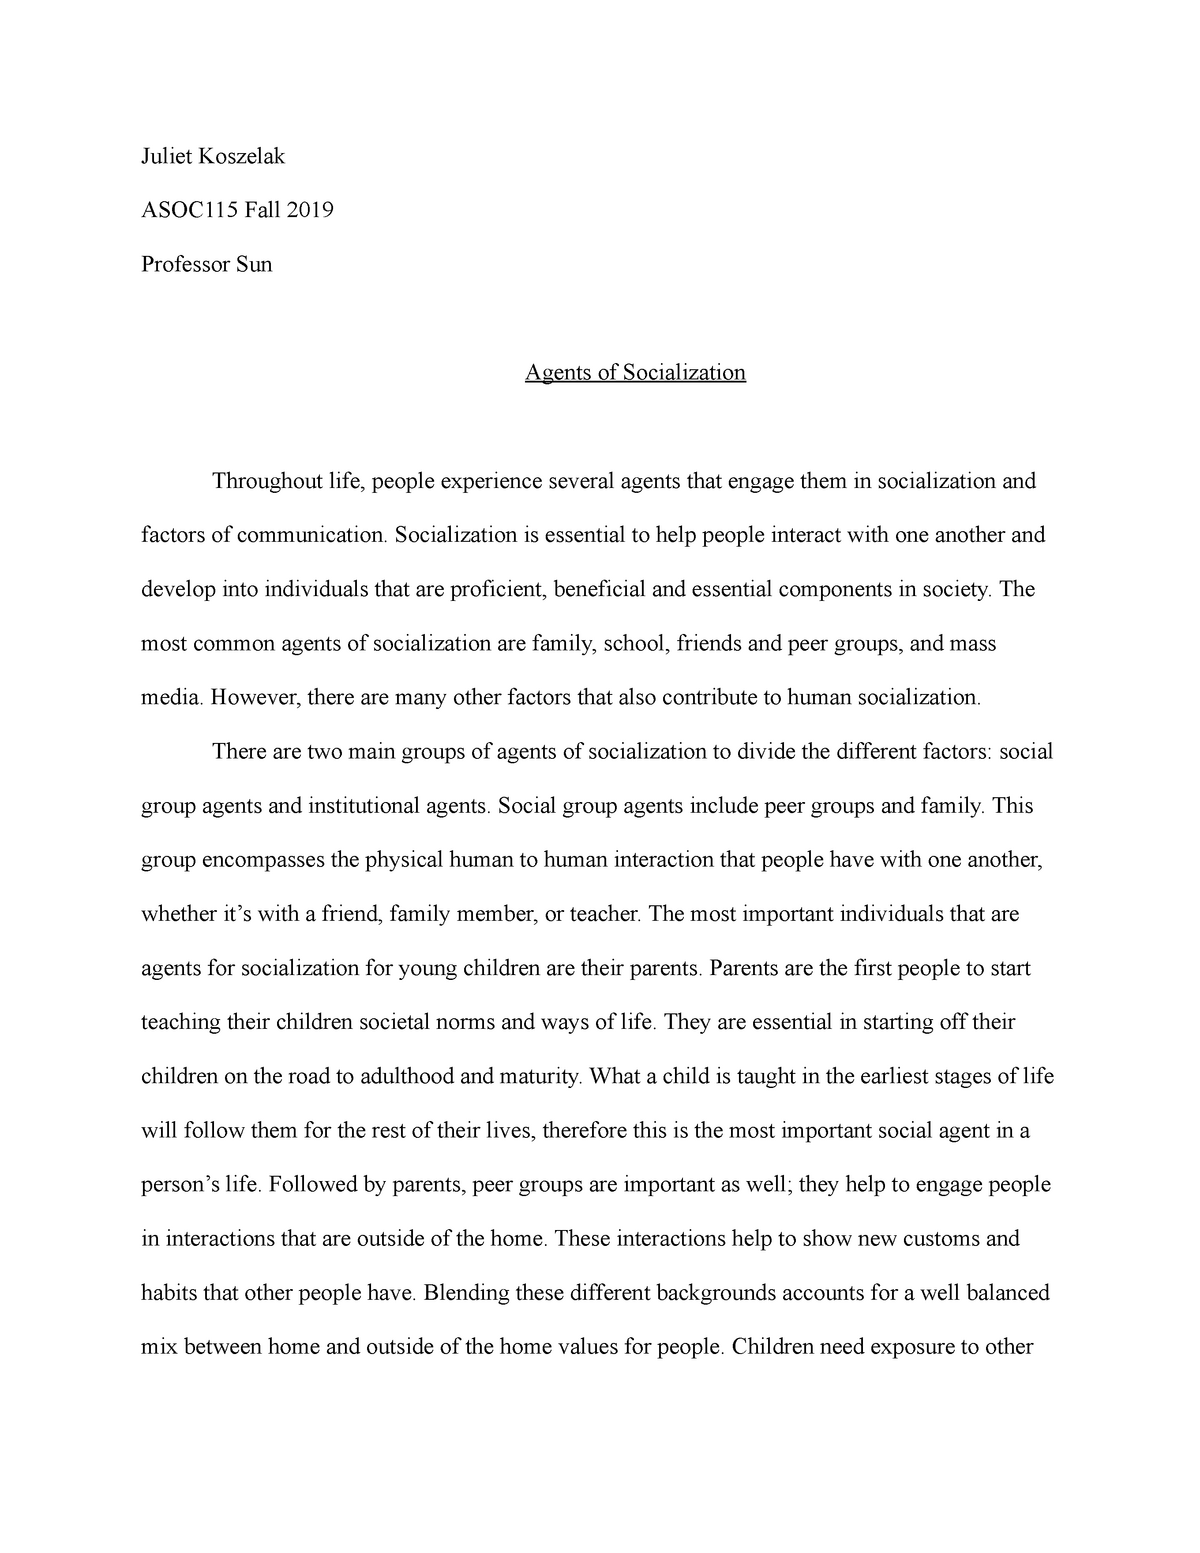 essay about agents of socialization